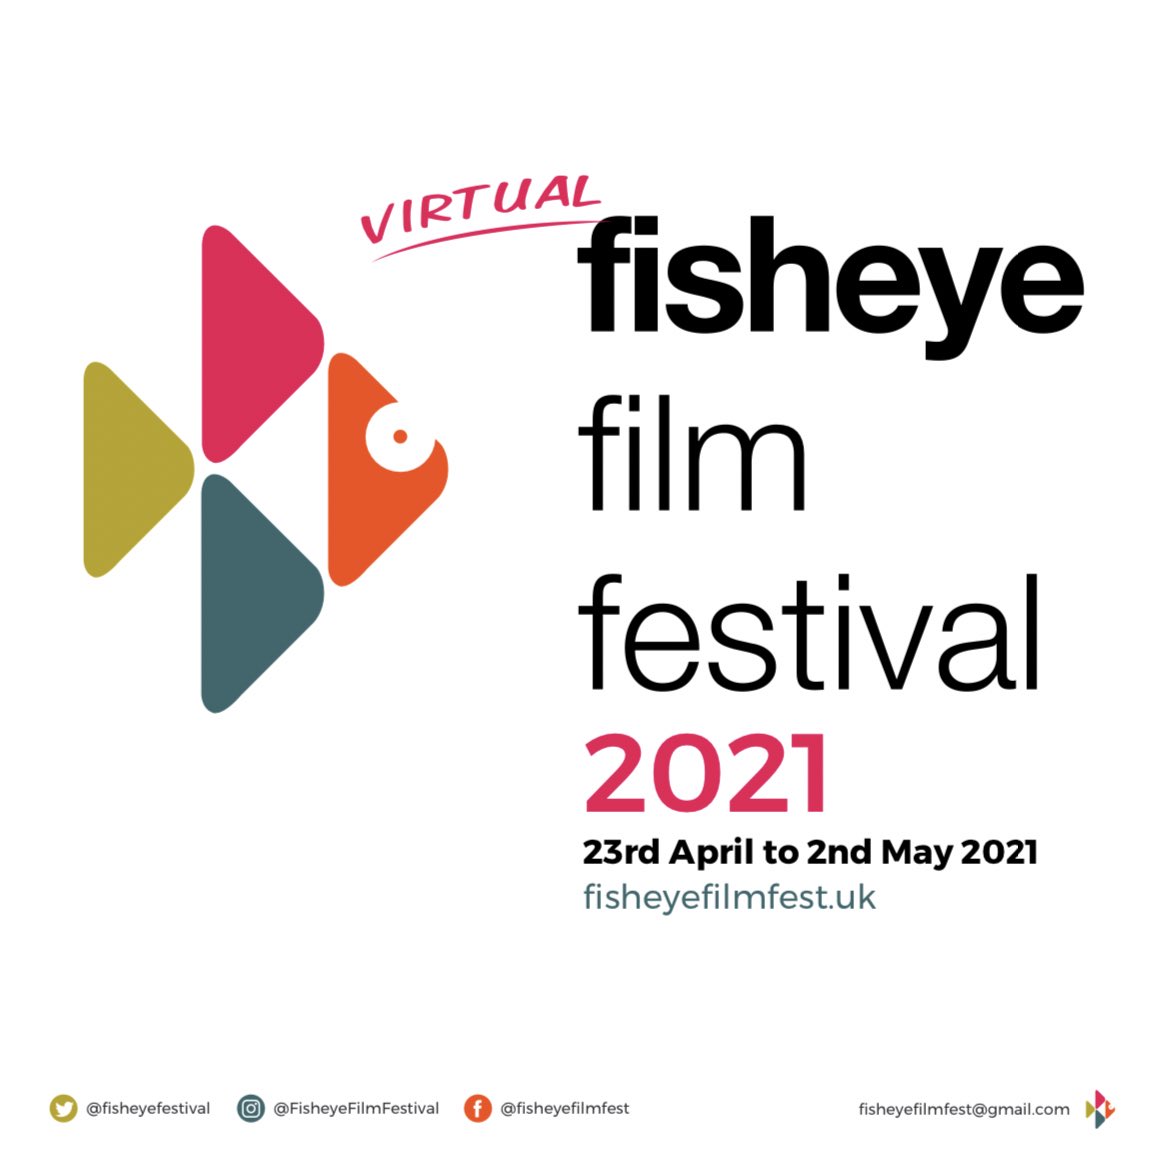 Just a reminder you can see our documentary BIG PINK DRESS right now over at #FisheyeFilmFest and tonight you can join director @chrisjallan discussing it in a Q&A with other filmmakers from this years event! Follow @Fisheyefestival for more details 🎬